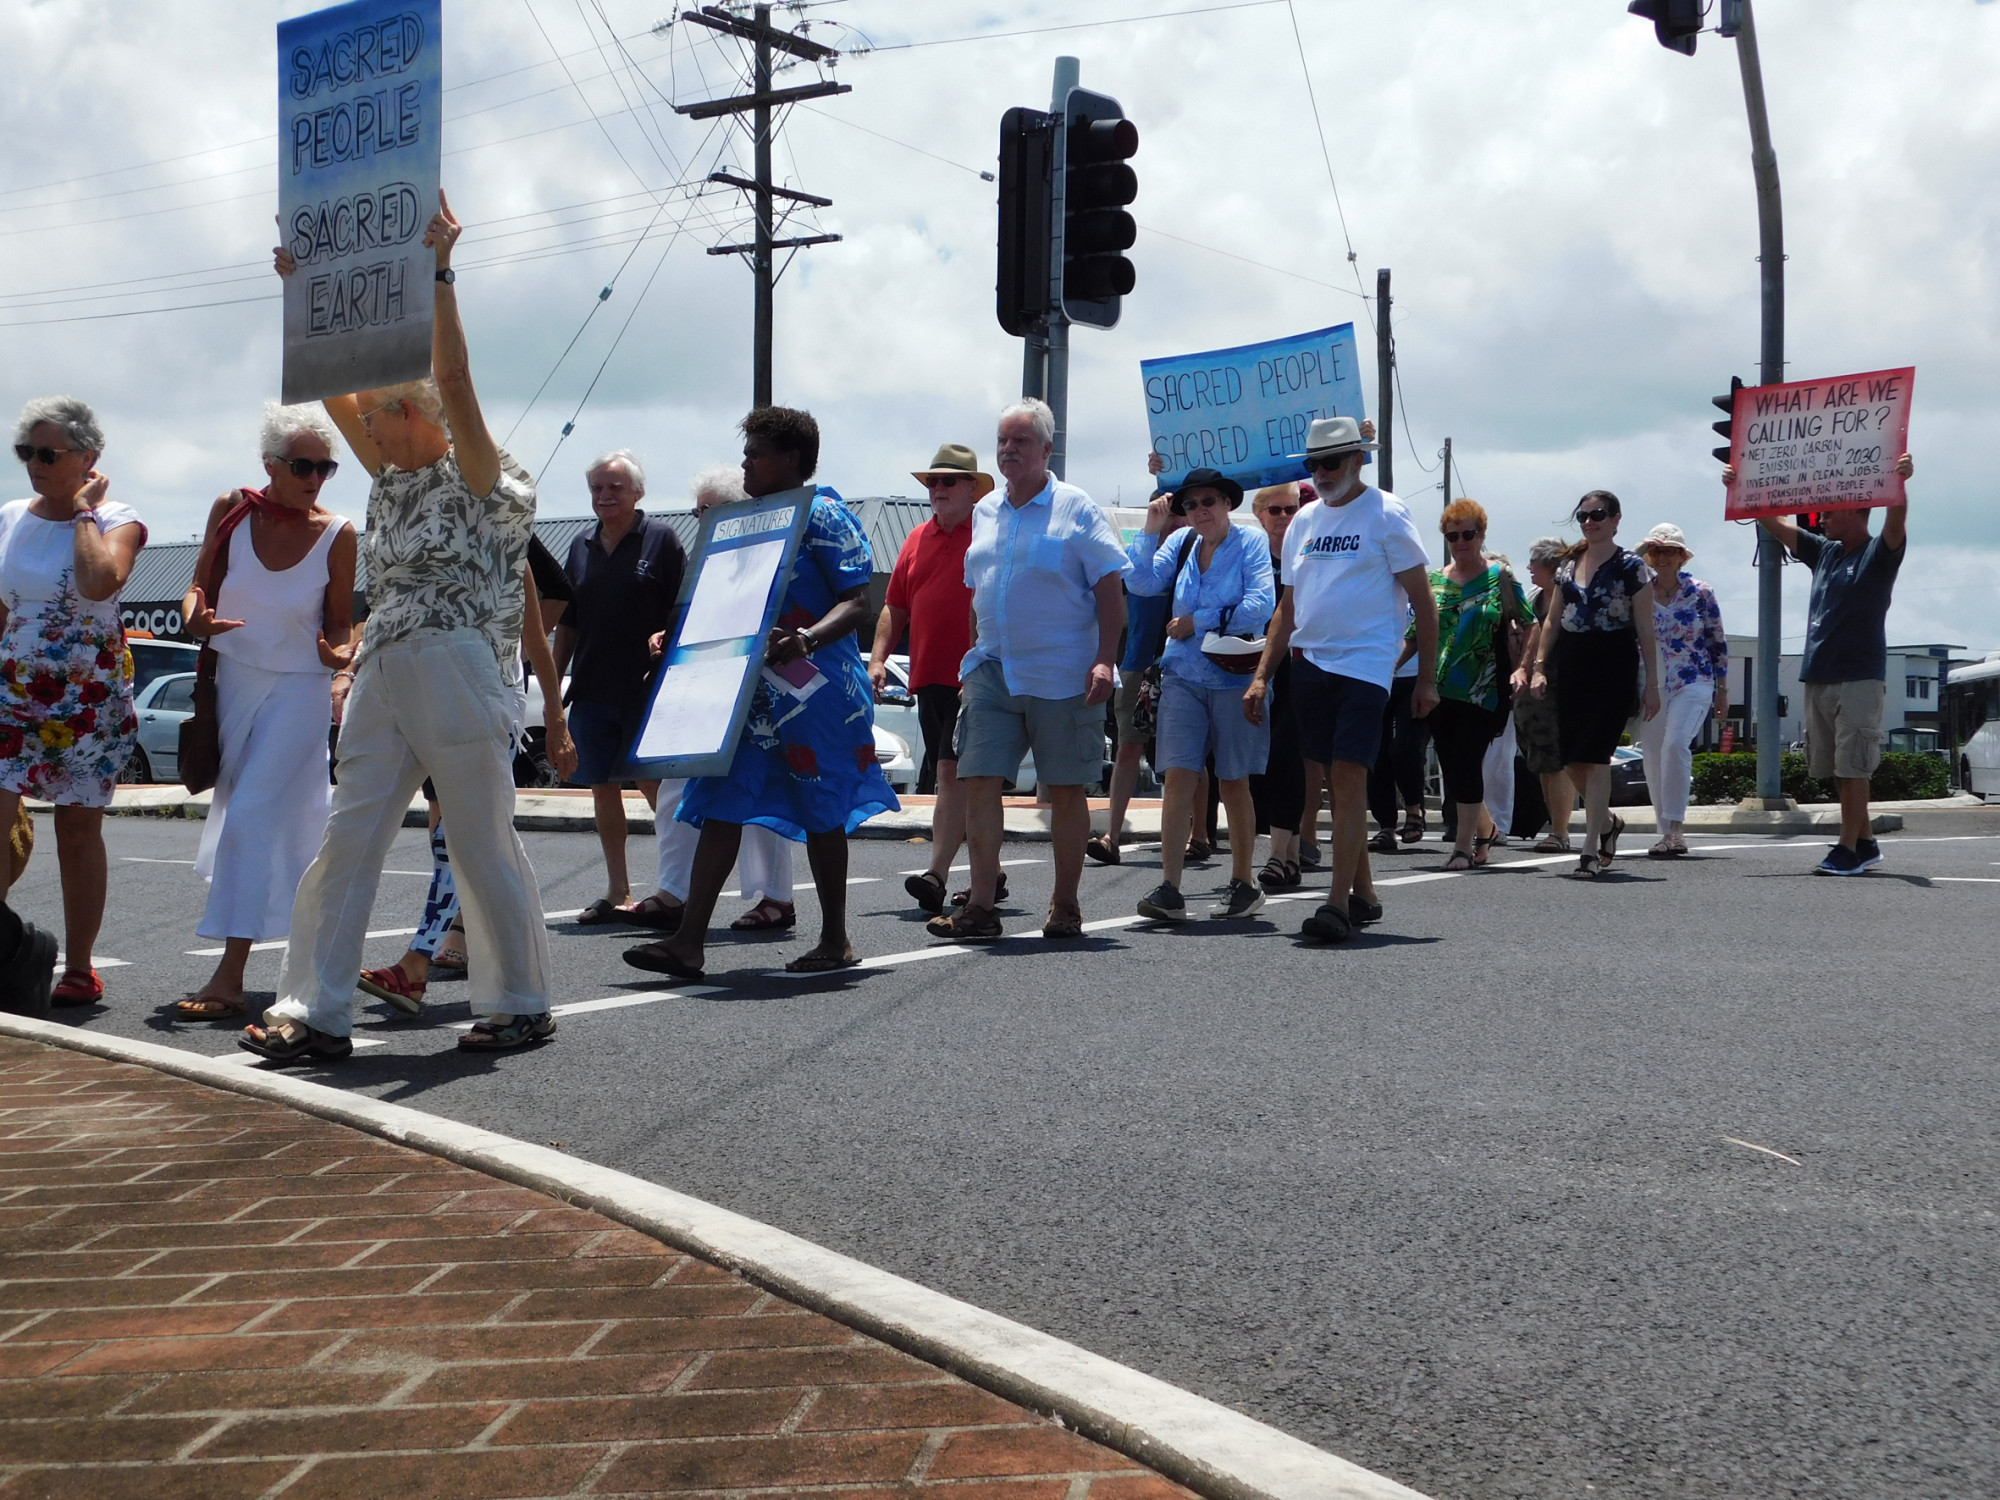 Members of the Cairns religious community marched to Warren Entsch’s office on Thursday.